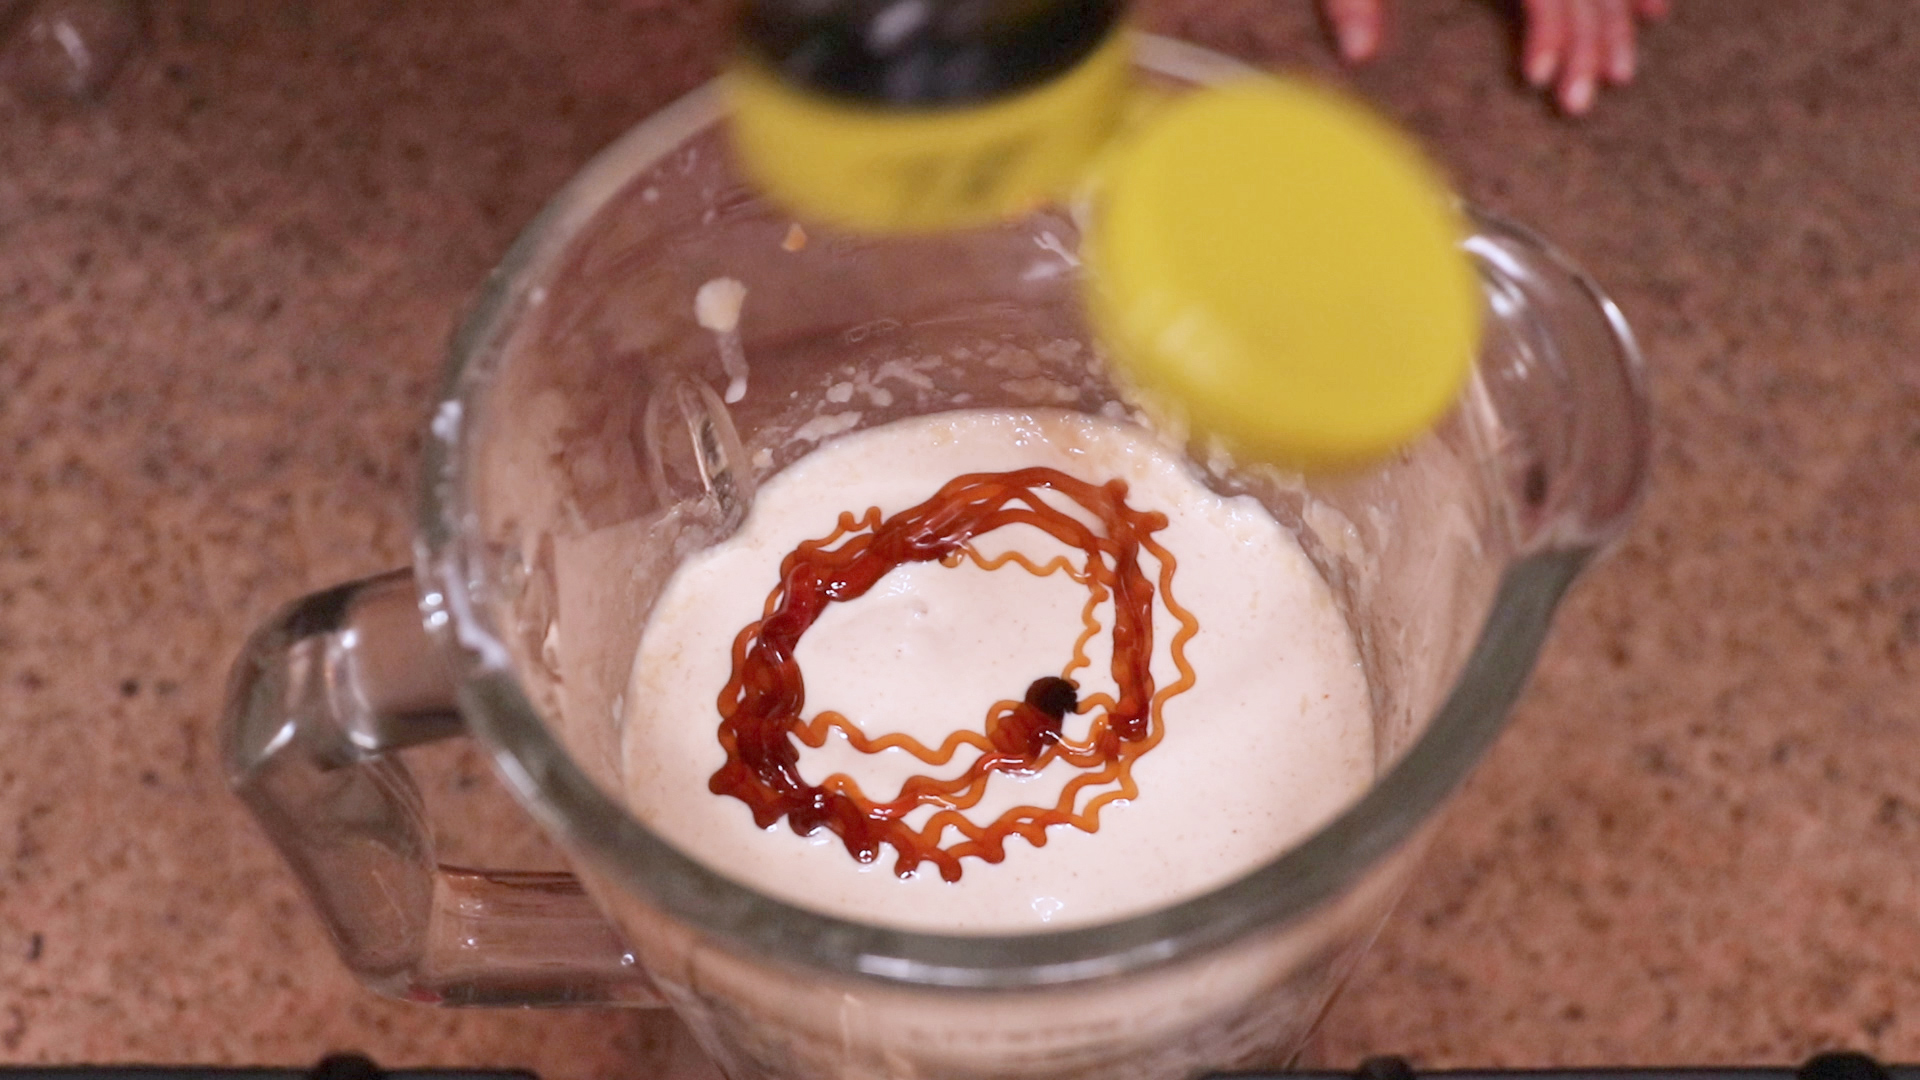 Honey being poured into a blender